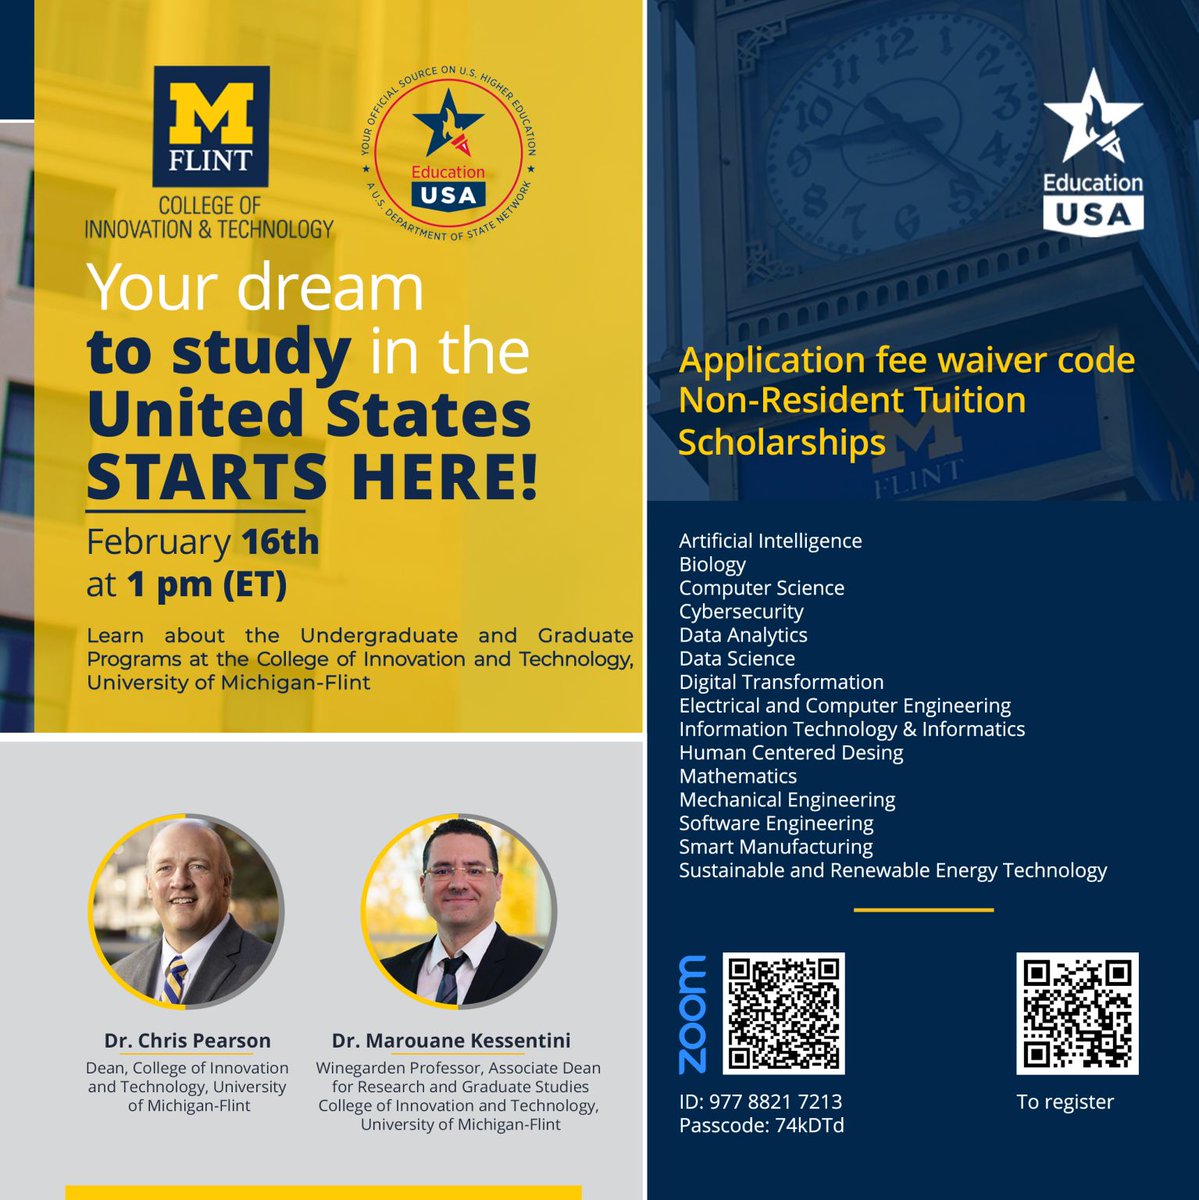 Check out this event organized by EducationUSA and CIT! To register, please complete this brief form: lnkd.in/gbephW6A 

#internationalstudents #studyusa  #educationmatters #studyabroad #CIT #EducationUSA #umich #umflint